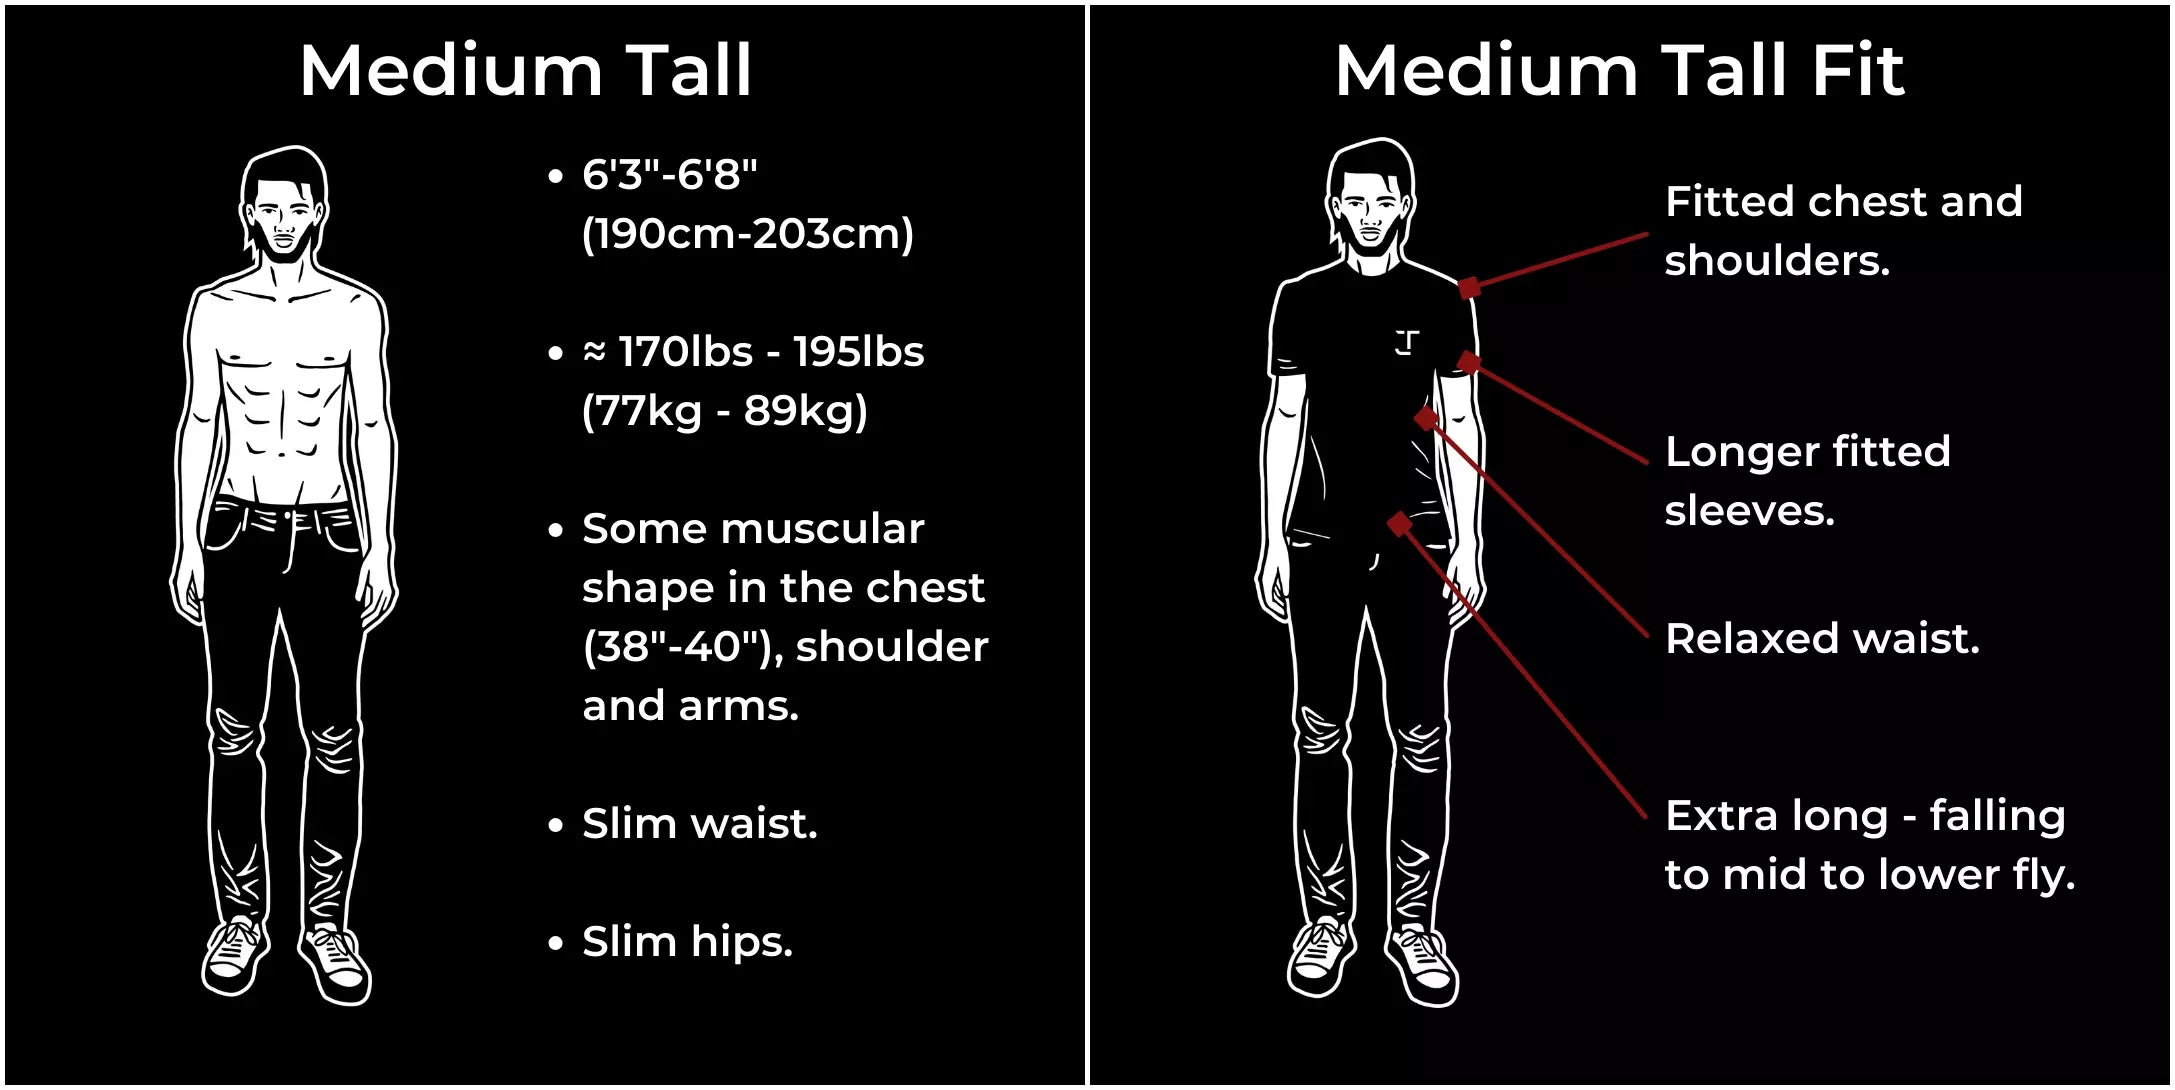 Medium tall for tall and slim guys 170-195lbs and 6'3"-6'8".